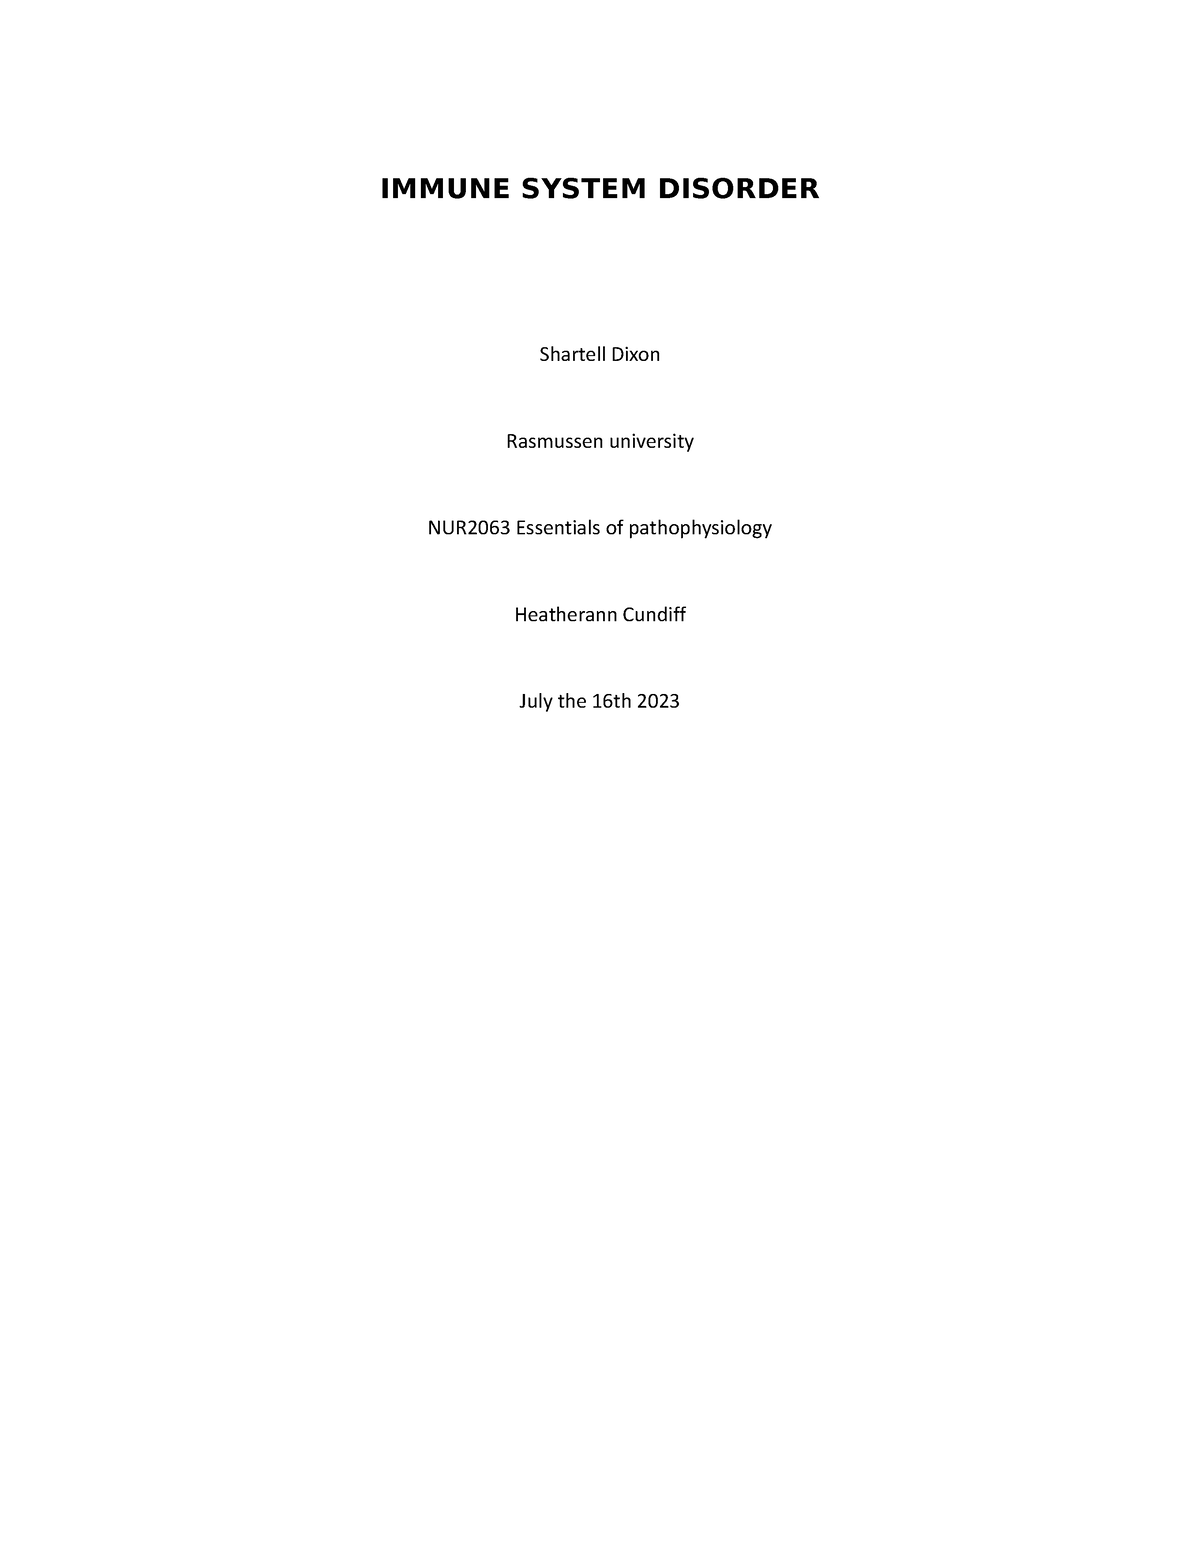 Electrolyte Paper Template 3 - IMMUNE SYSTEM DISORDER Shartell Dixon ...